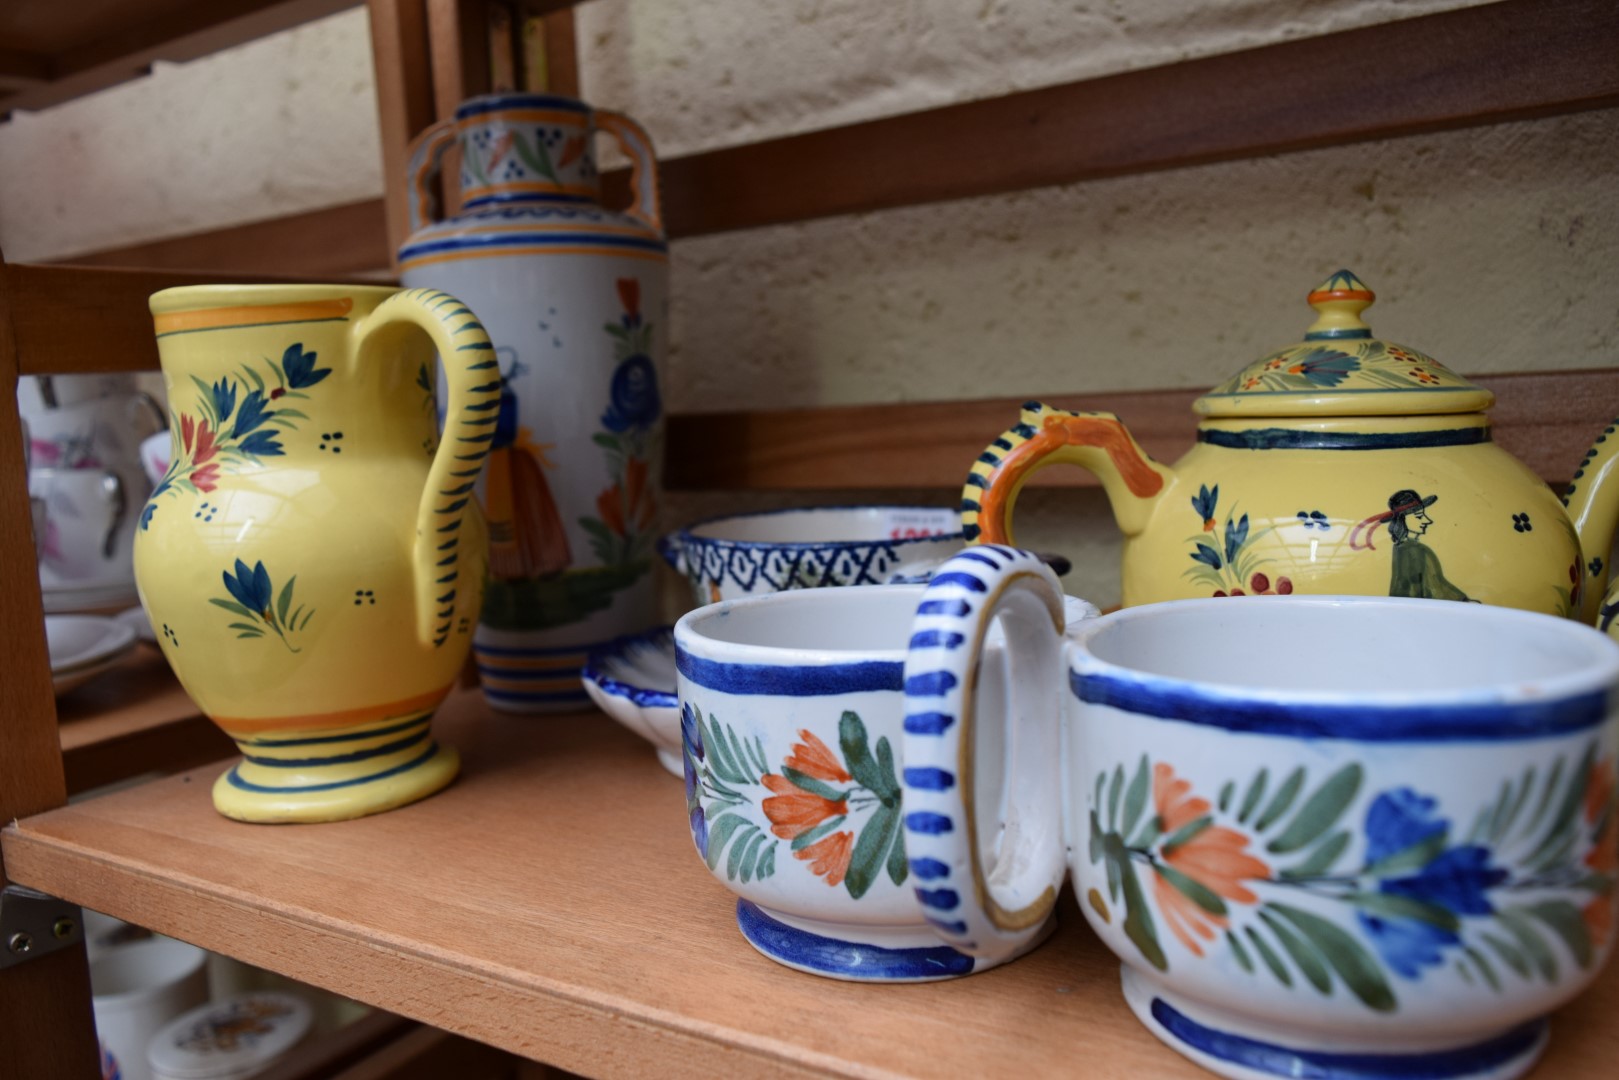 *WITHDRAWN FROM SALE*A collection of ten items of Quimper ware pottery, together with price guide. - Image 7 of 22